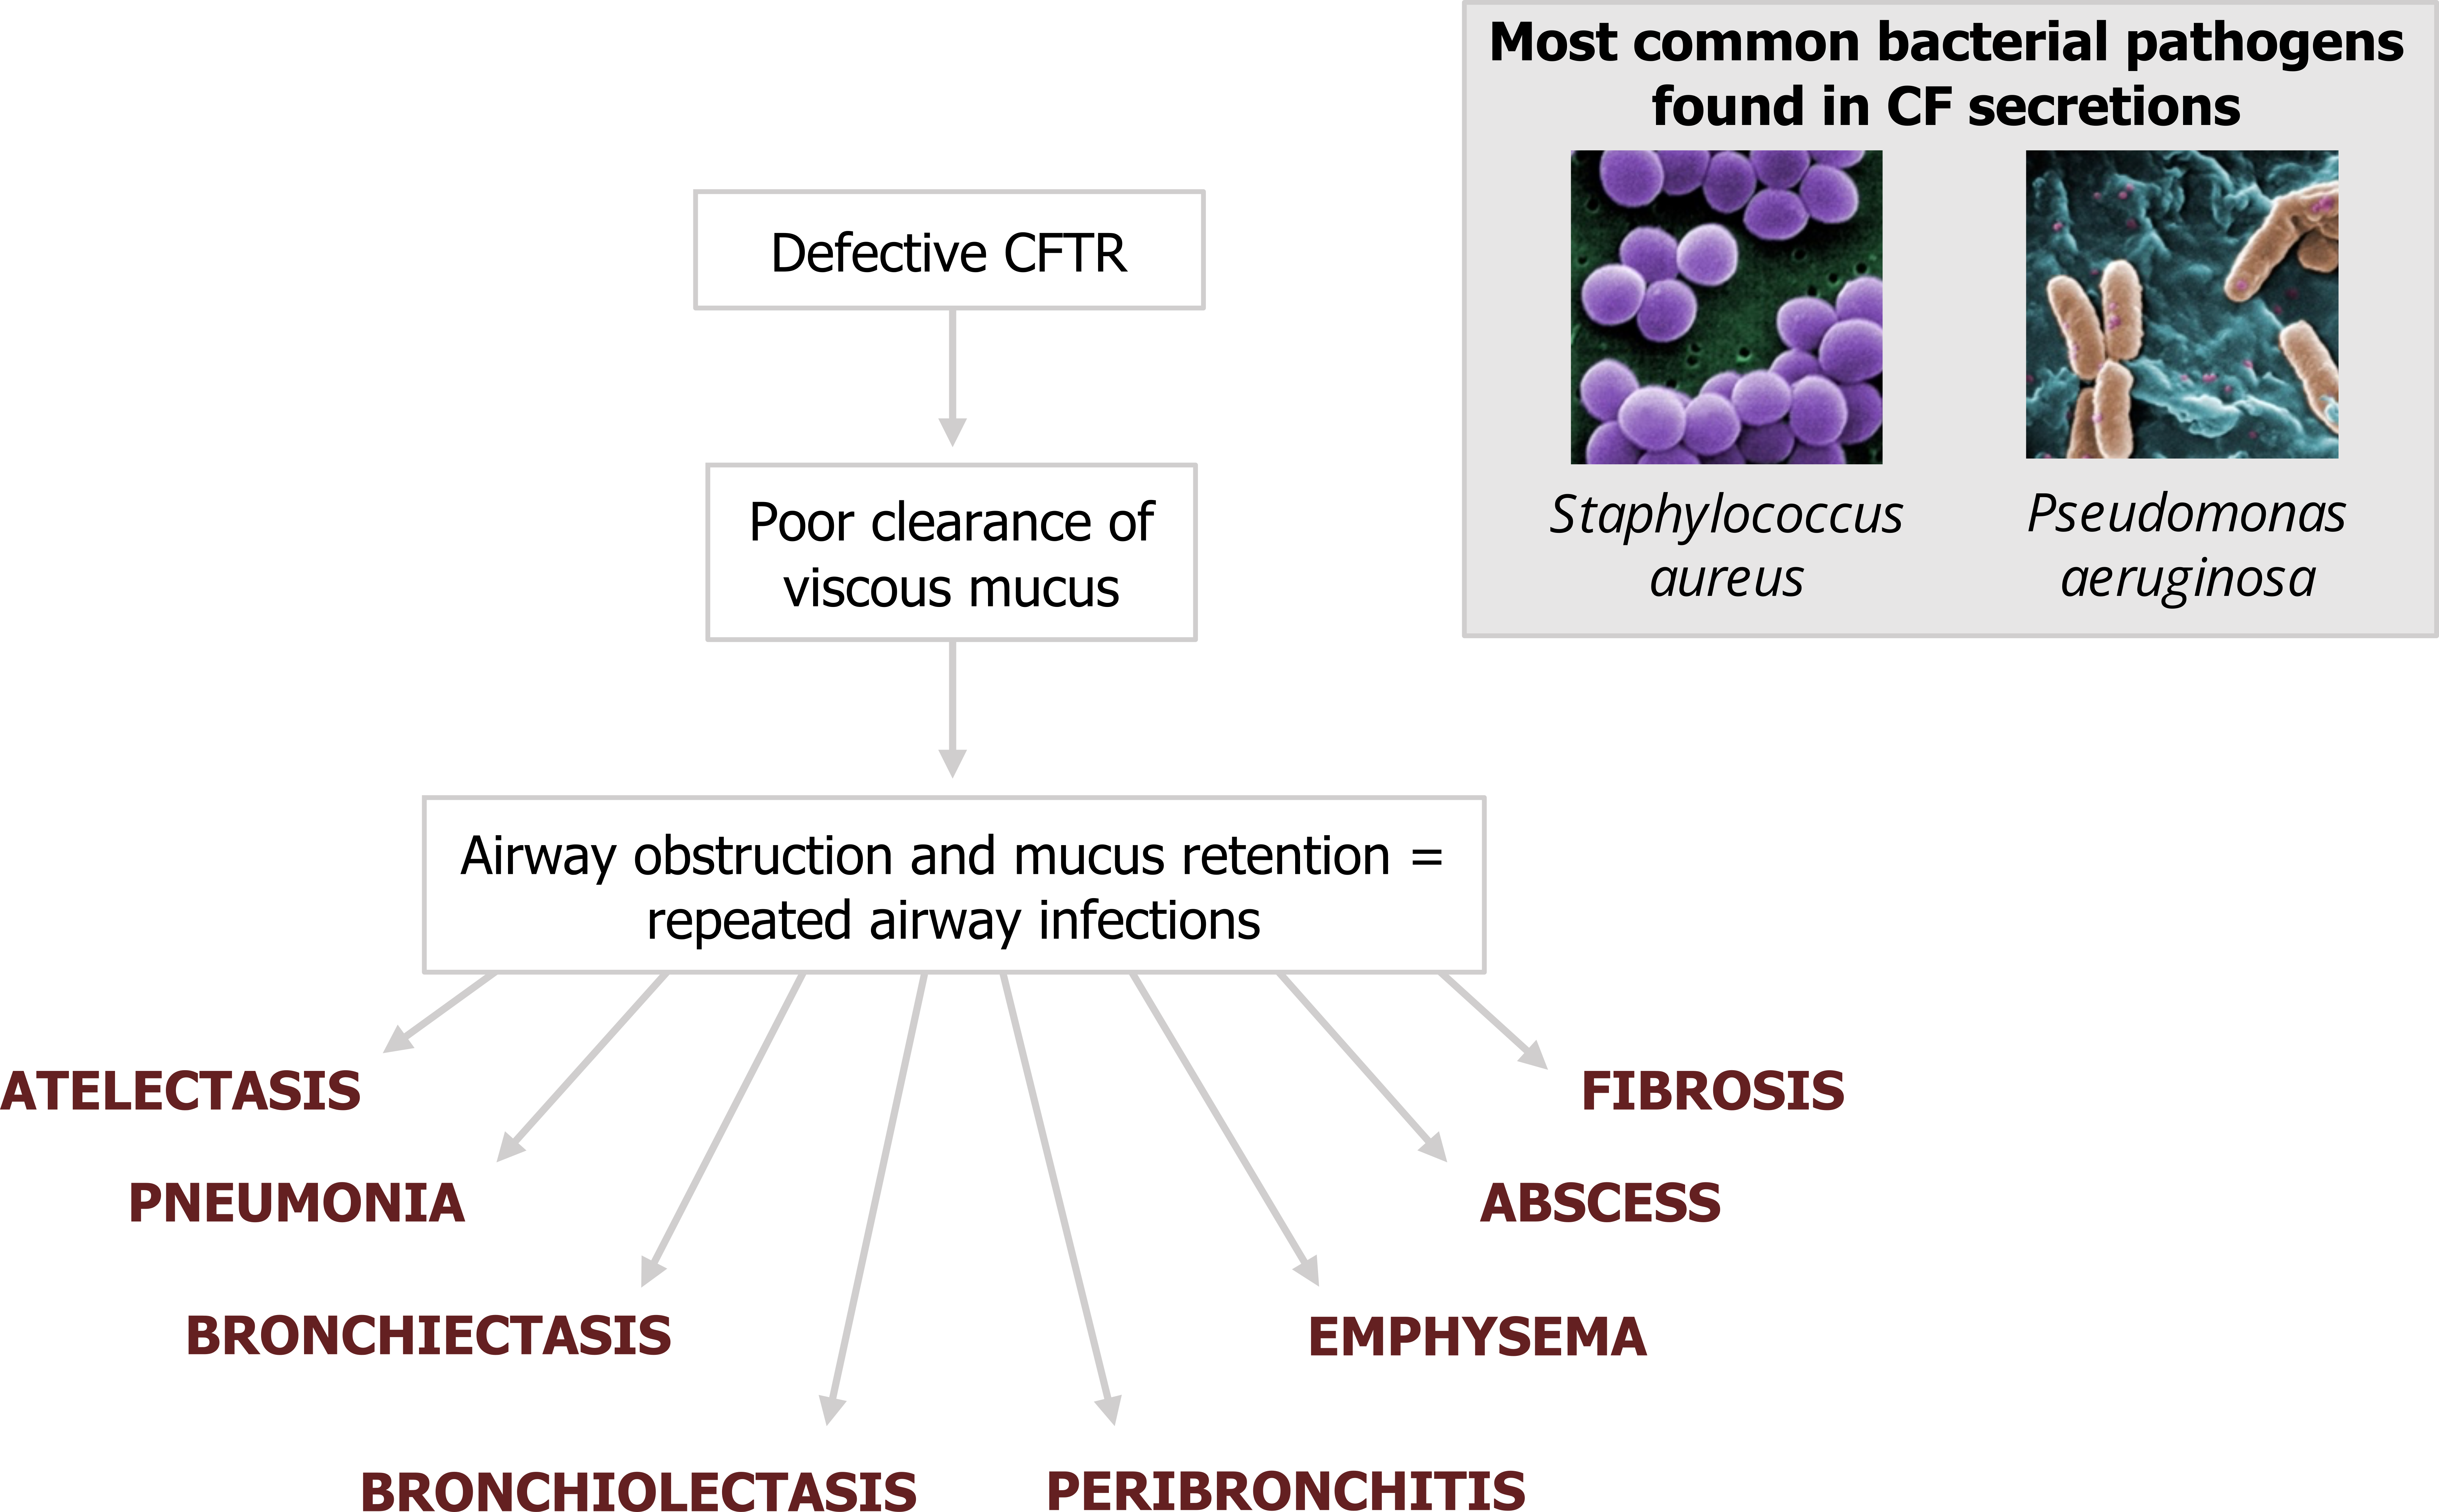 Defective CFTR arrow to poor clearance of viscous mucus arrow to airway obstruction and mucus retention = repeated airway infections arrows to atelectasis, pneumonia, bronchiectasis, bronchiolectasis, peribronchitis, emphysema, abscess, fibrosis. Most common bacterial pathogens found in CF secretions: Staphylococcus aureus and pseudomonas aeruginosa.